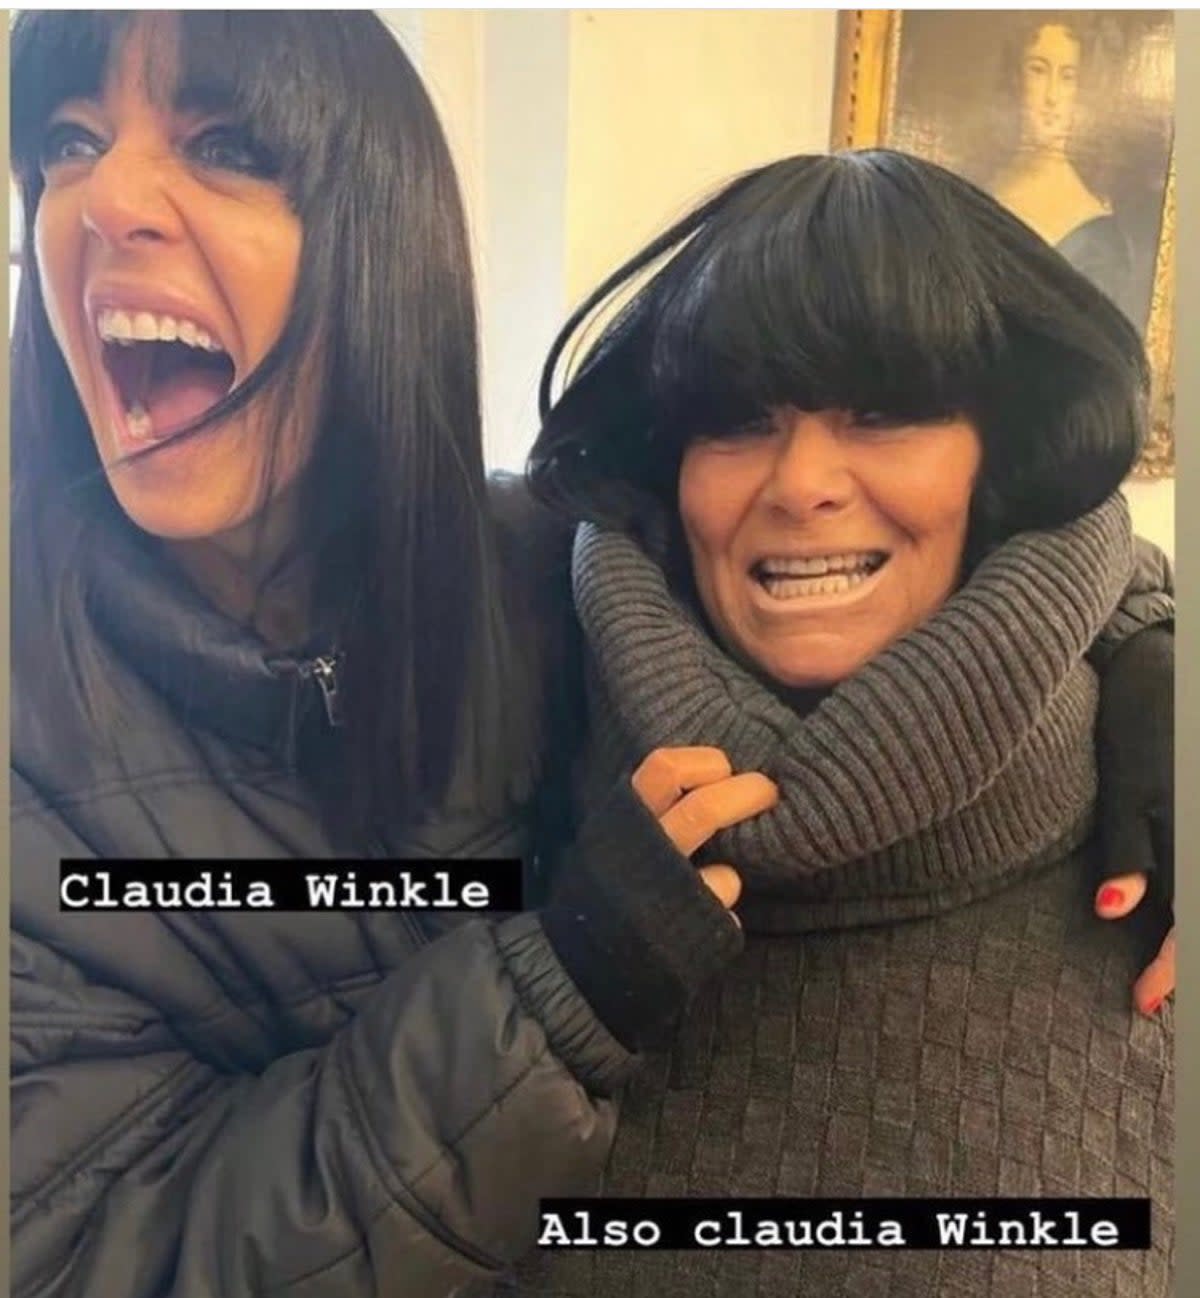 Claudia Winkleman (L) was left in hysterics by Dawn French’s (R) impression of her  (Dawn French/Instagram)